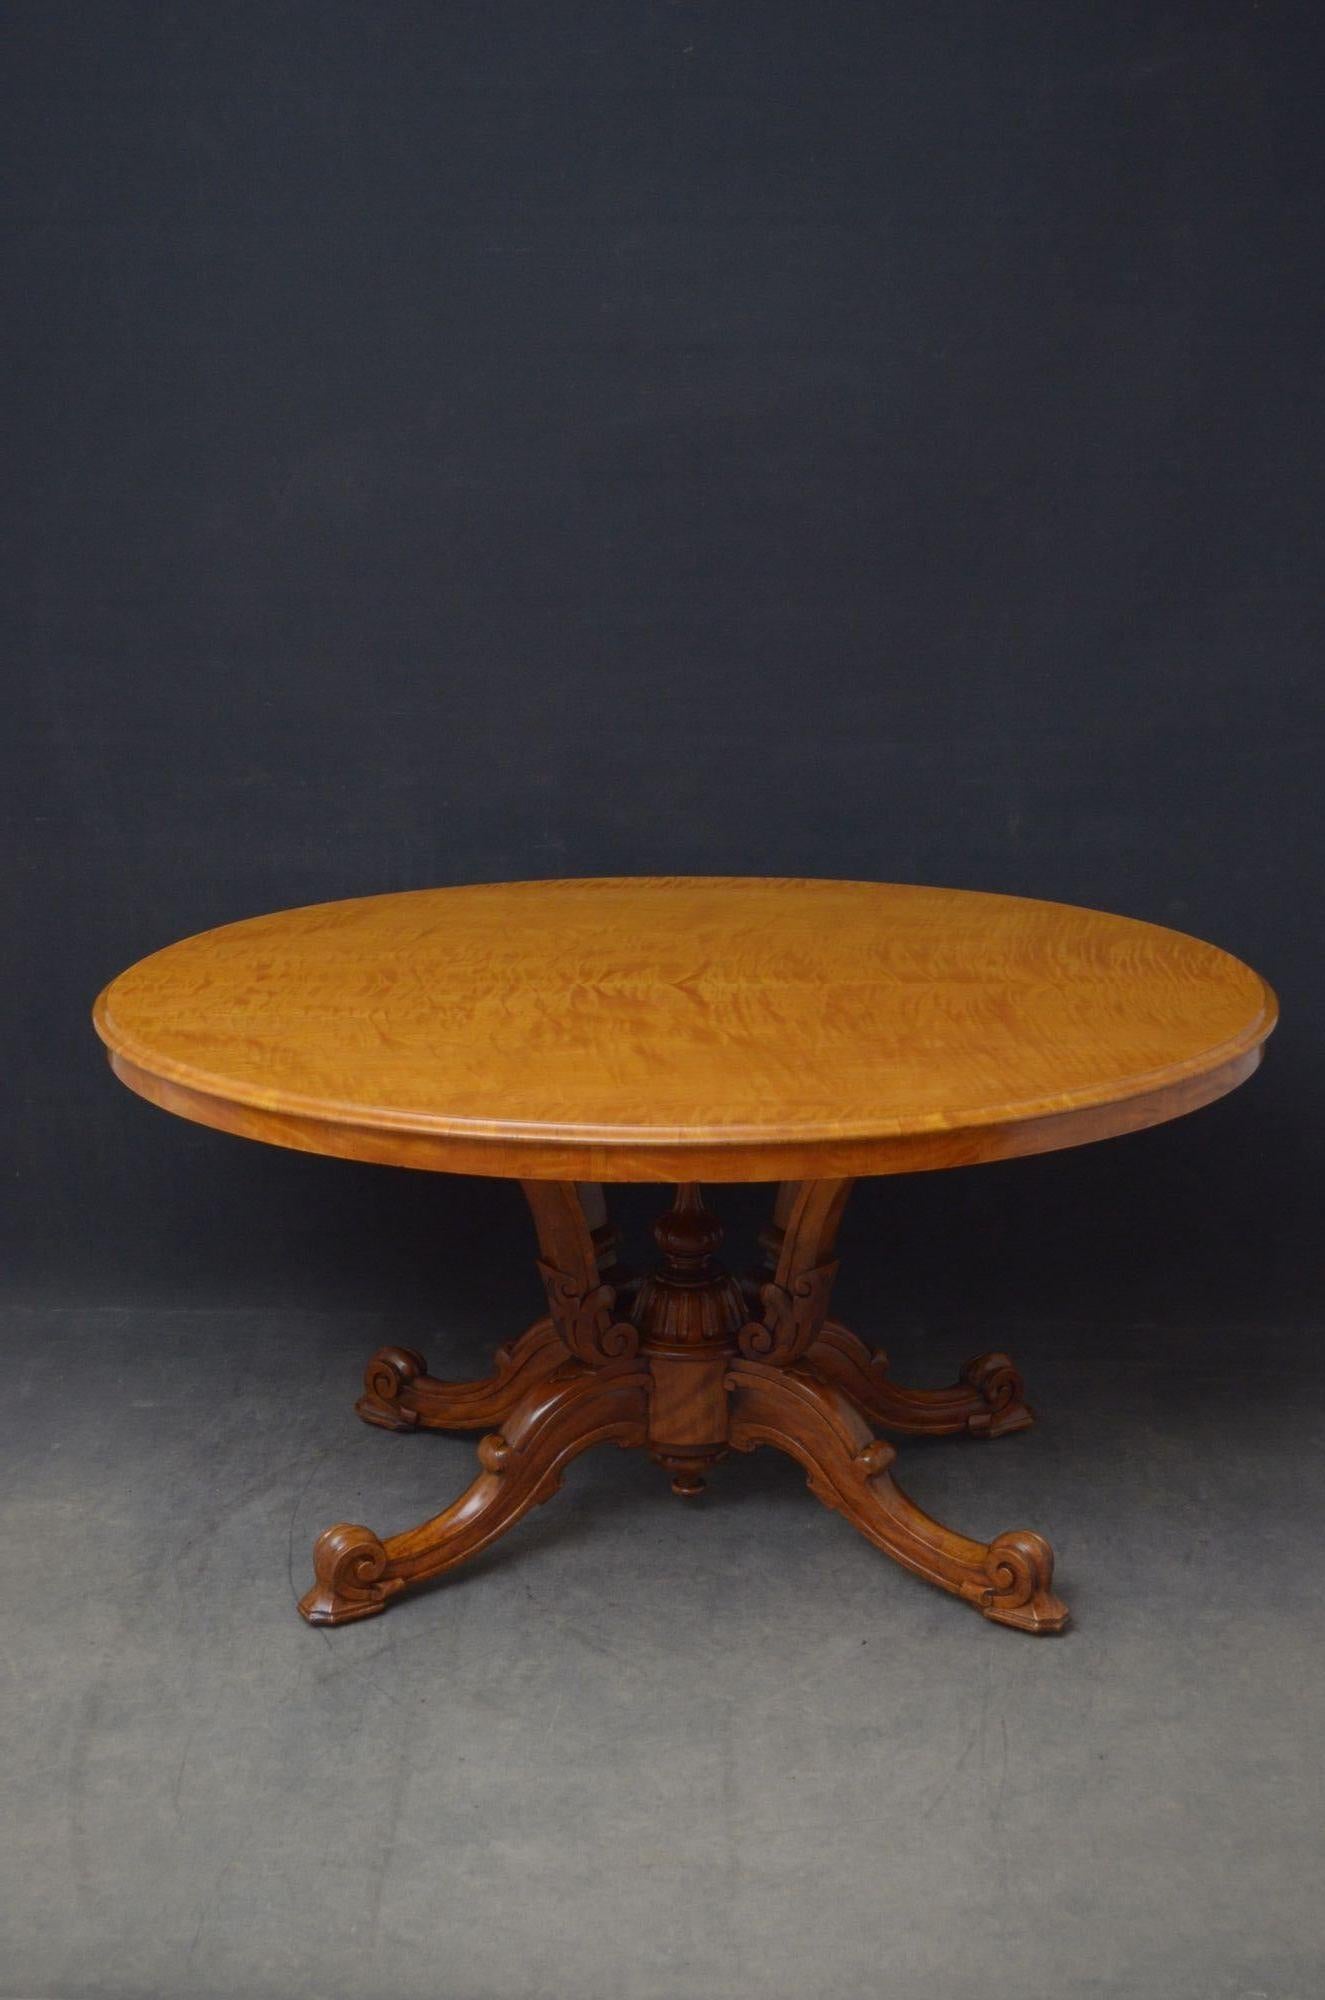 British Rare Victorian Satinwood Centre Table / Dining Table For Sale